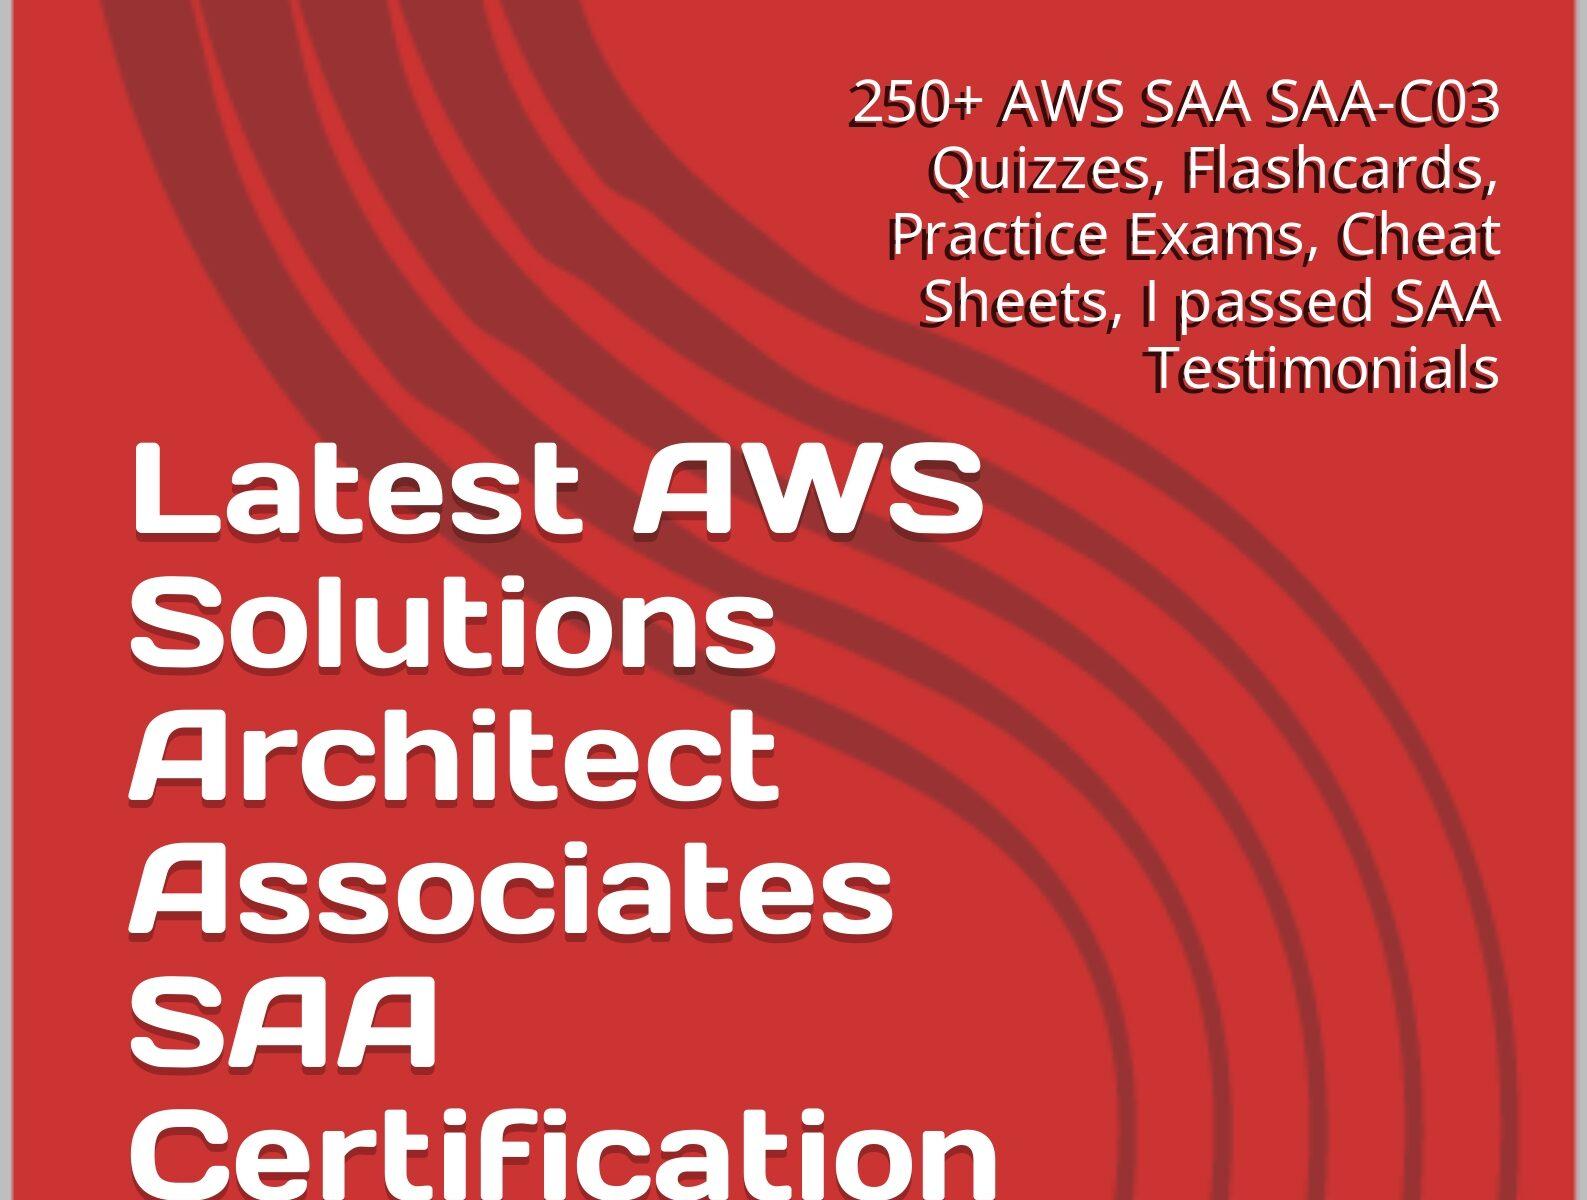 2023 AWS Solutions Architect Associates SAA Certification Practice Tests and Quizzes illustrated: 250+ AWS SAA SAA-C03 Quizzes, Practice Exams, Cheat Sheets, I passed SAA Testimonials, Tips